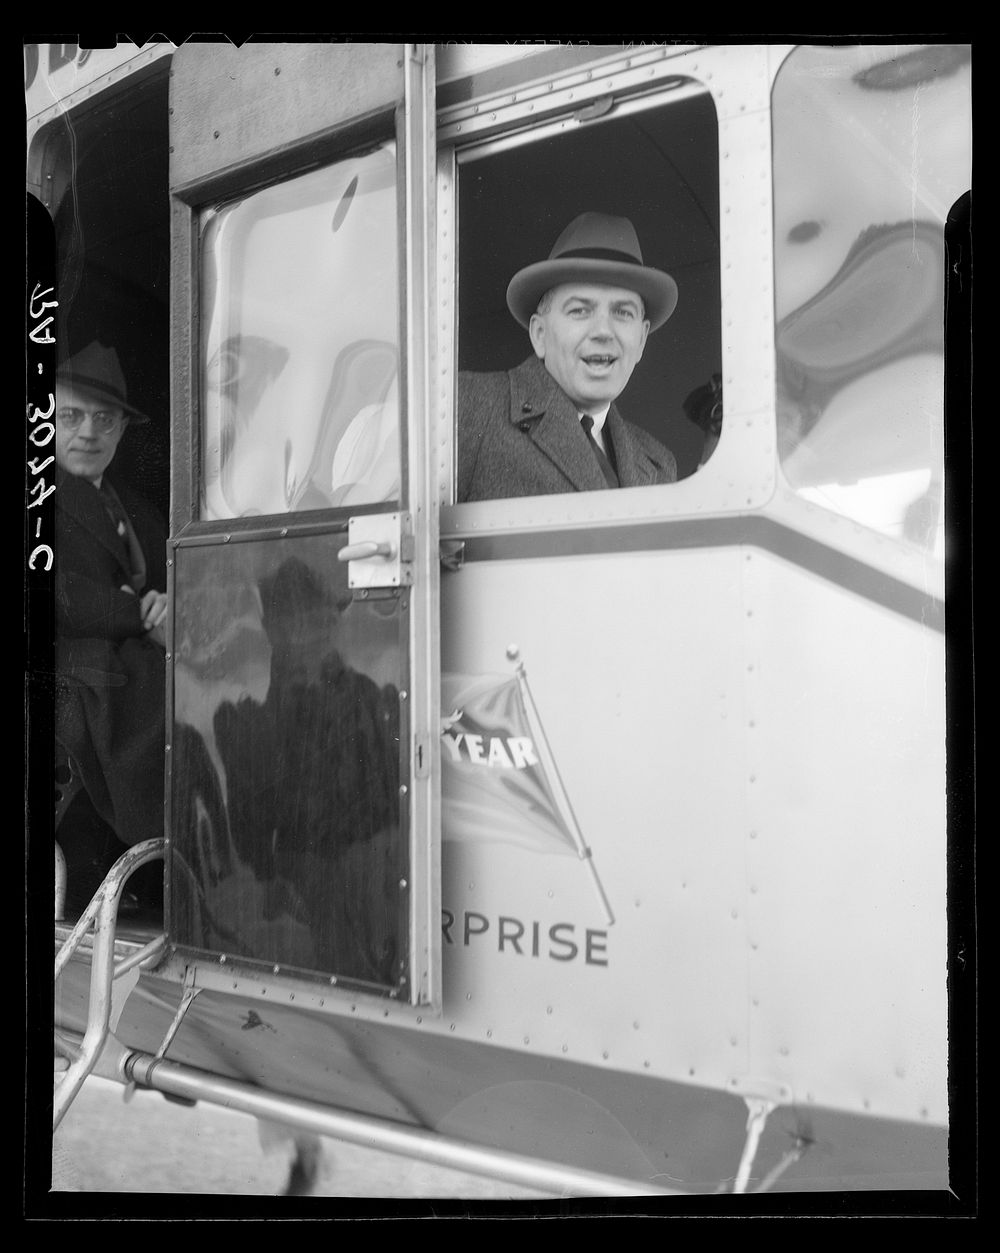 Administrator Tugwell at window of blimp before taking off. Sourced from the Library of Congress.